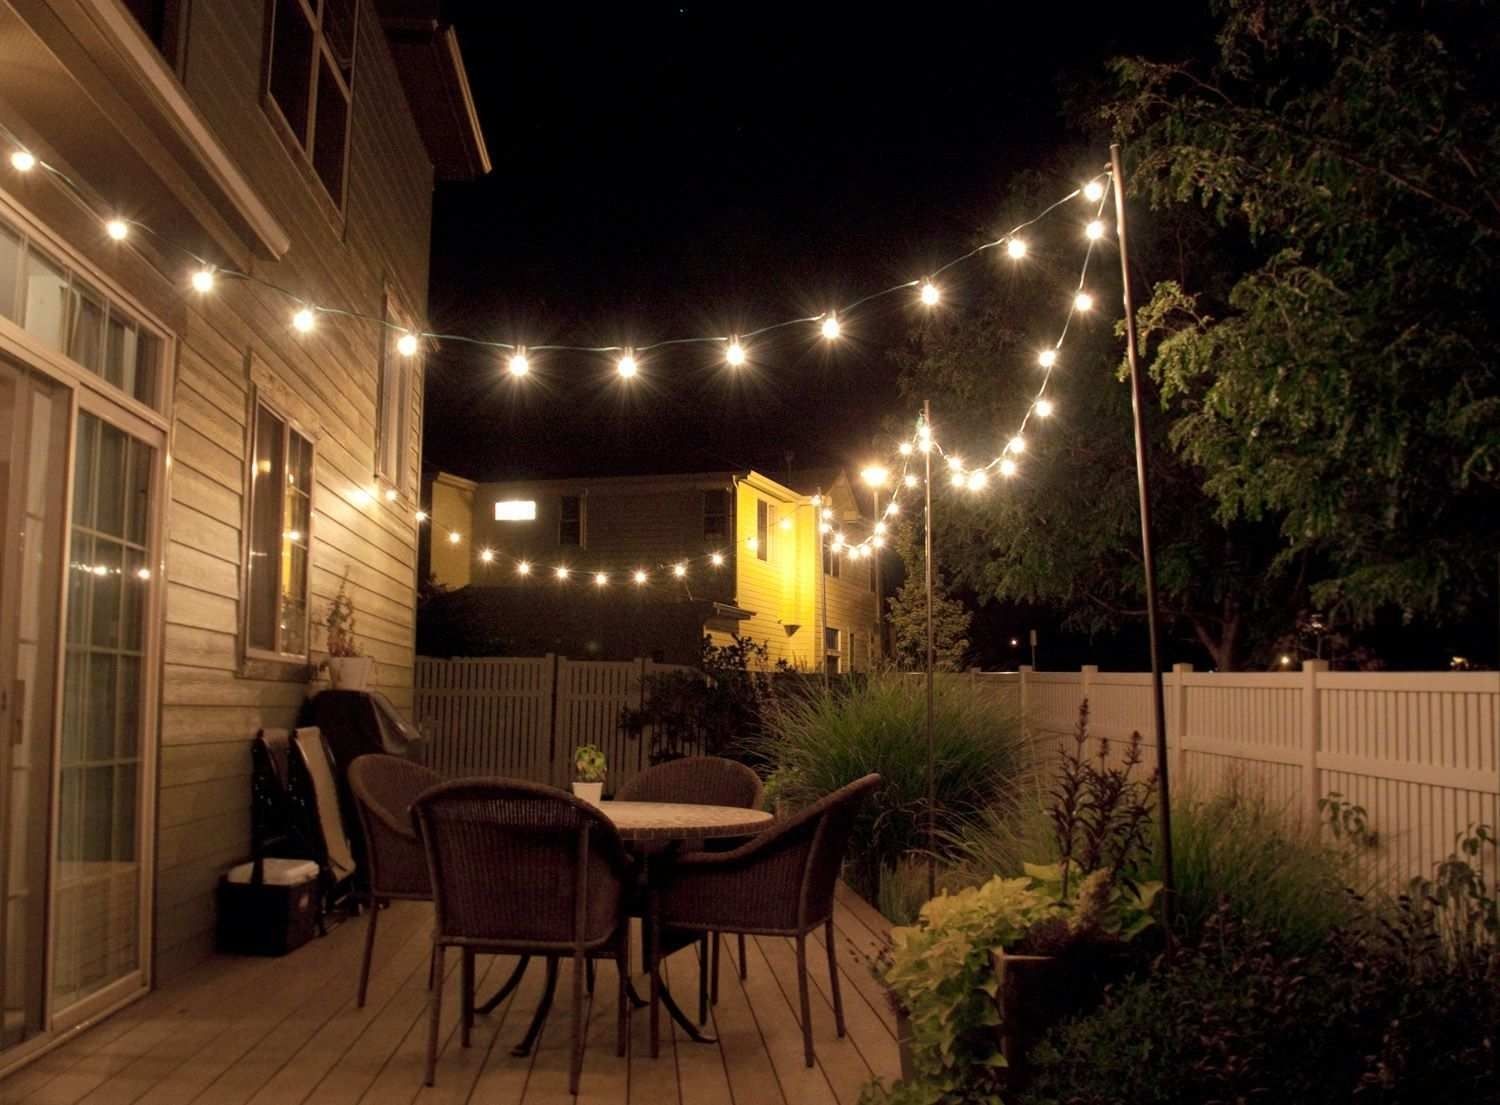 How To Hang Outdoor String Lights Without Trees Beautiful Bright Pertaining To Hanging Outdoor Lights Without Trees (View 2 of 15)